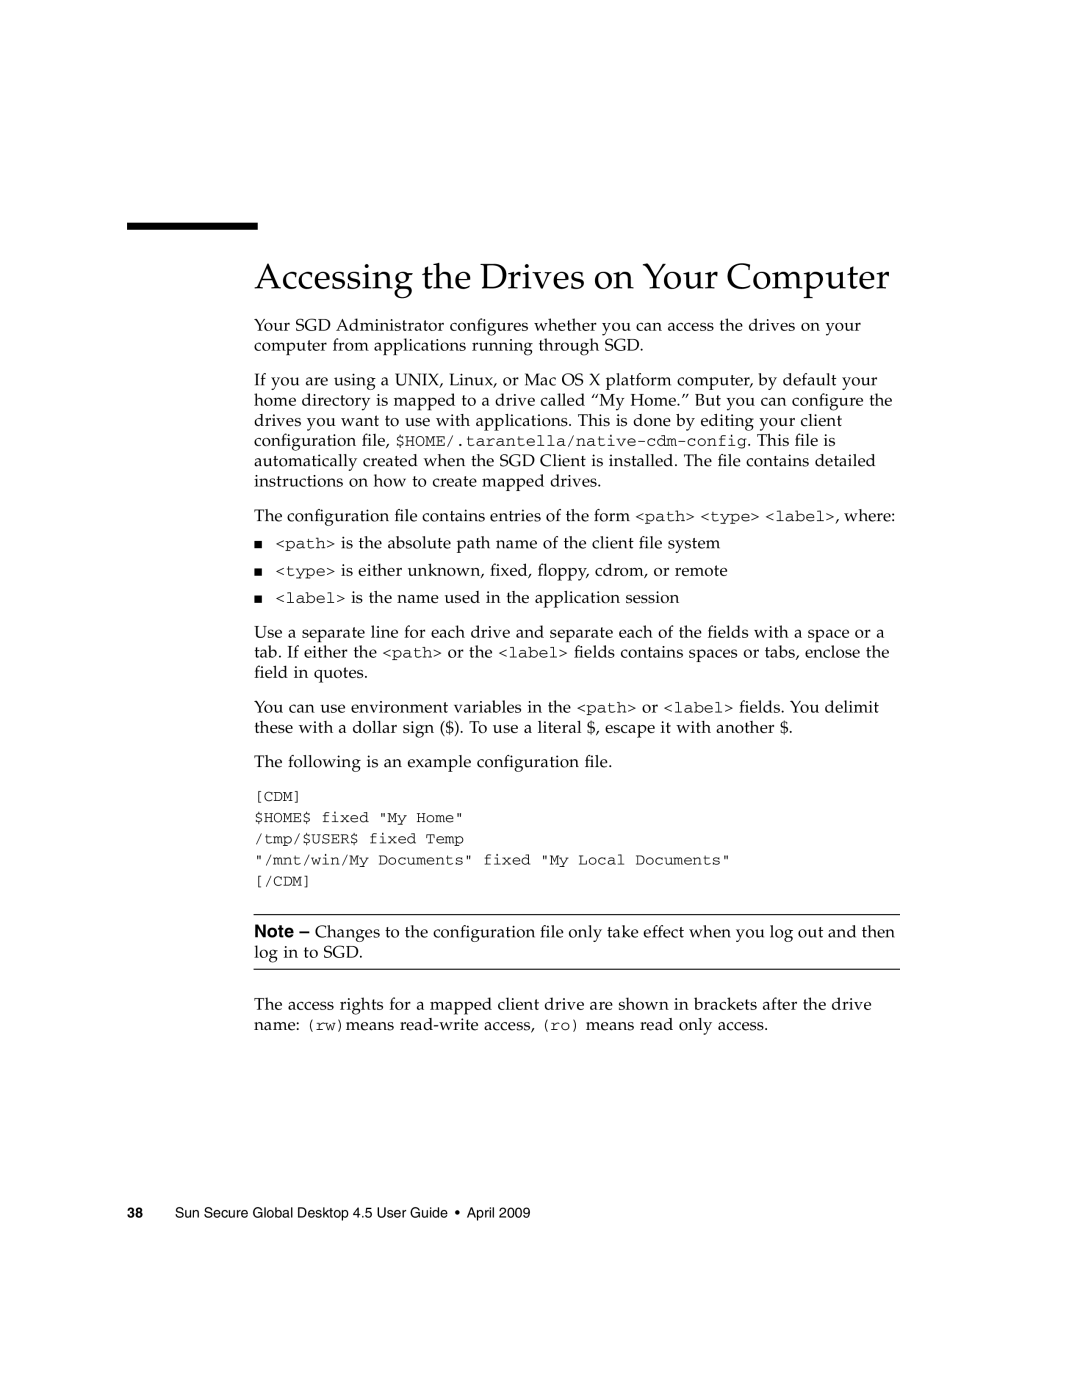 Sun Microsystems 4.5 manual Accessing the Drives on Your Computer 